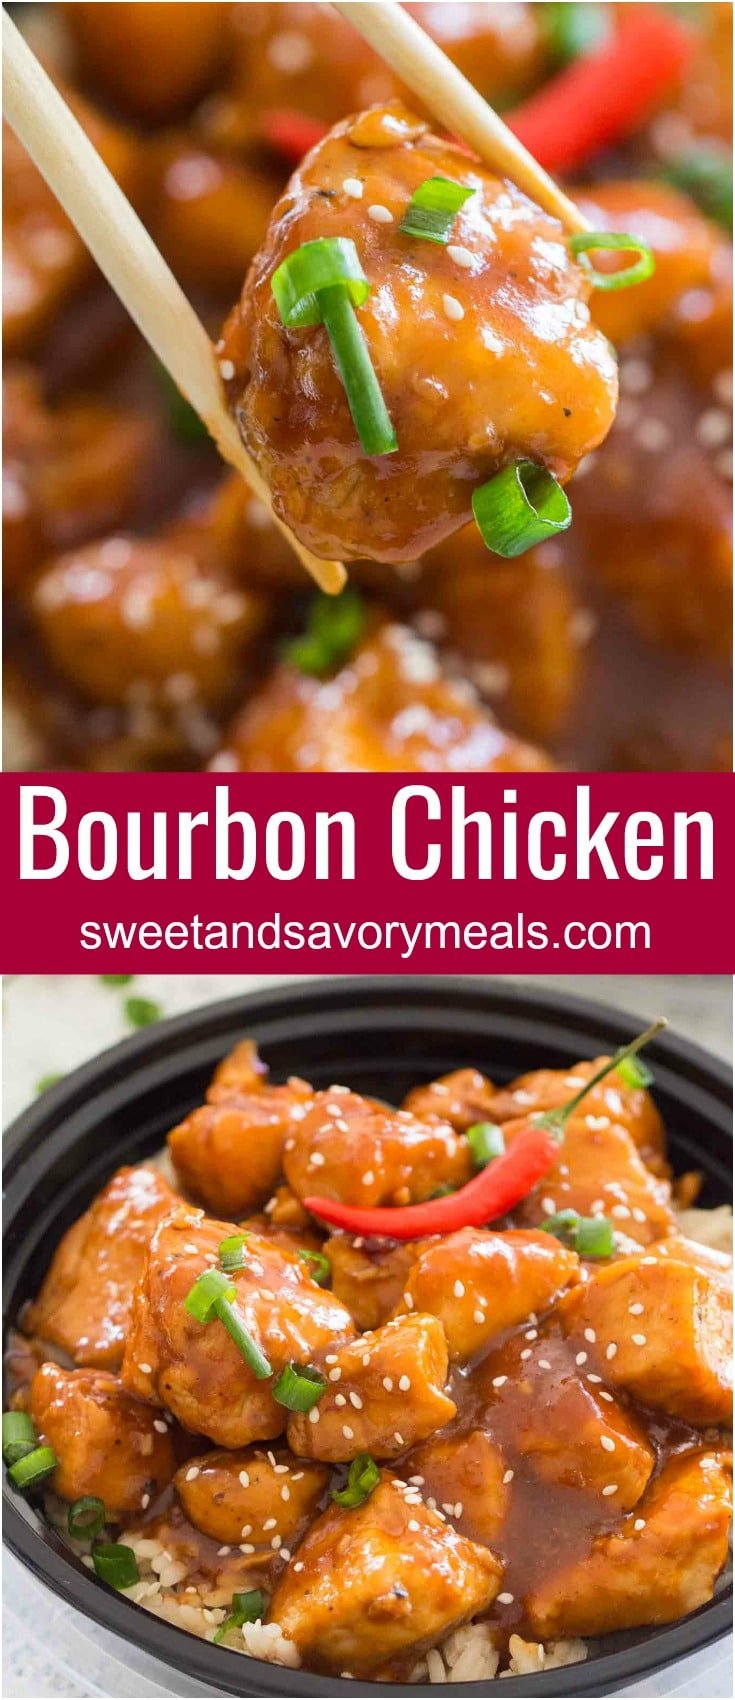 Spicy Bourbon Chicken is perfectly sweet, sticky and spicy, made in just one pan for a quick weeknight dinner with tasty leftovers.